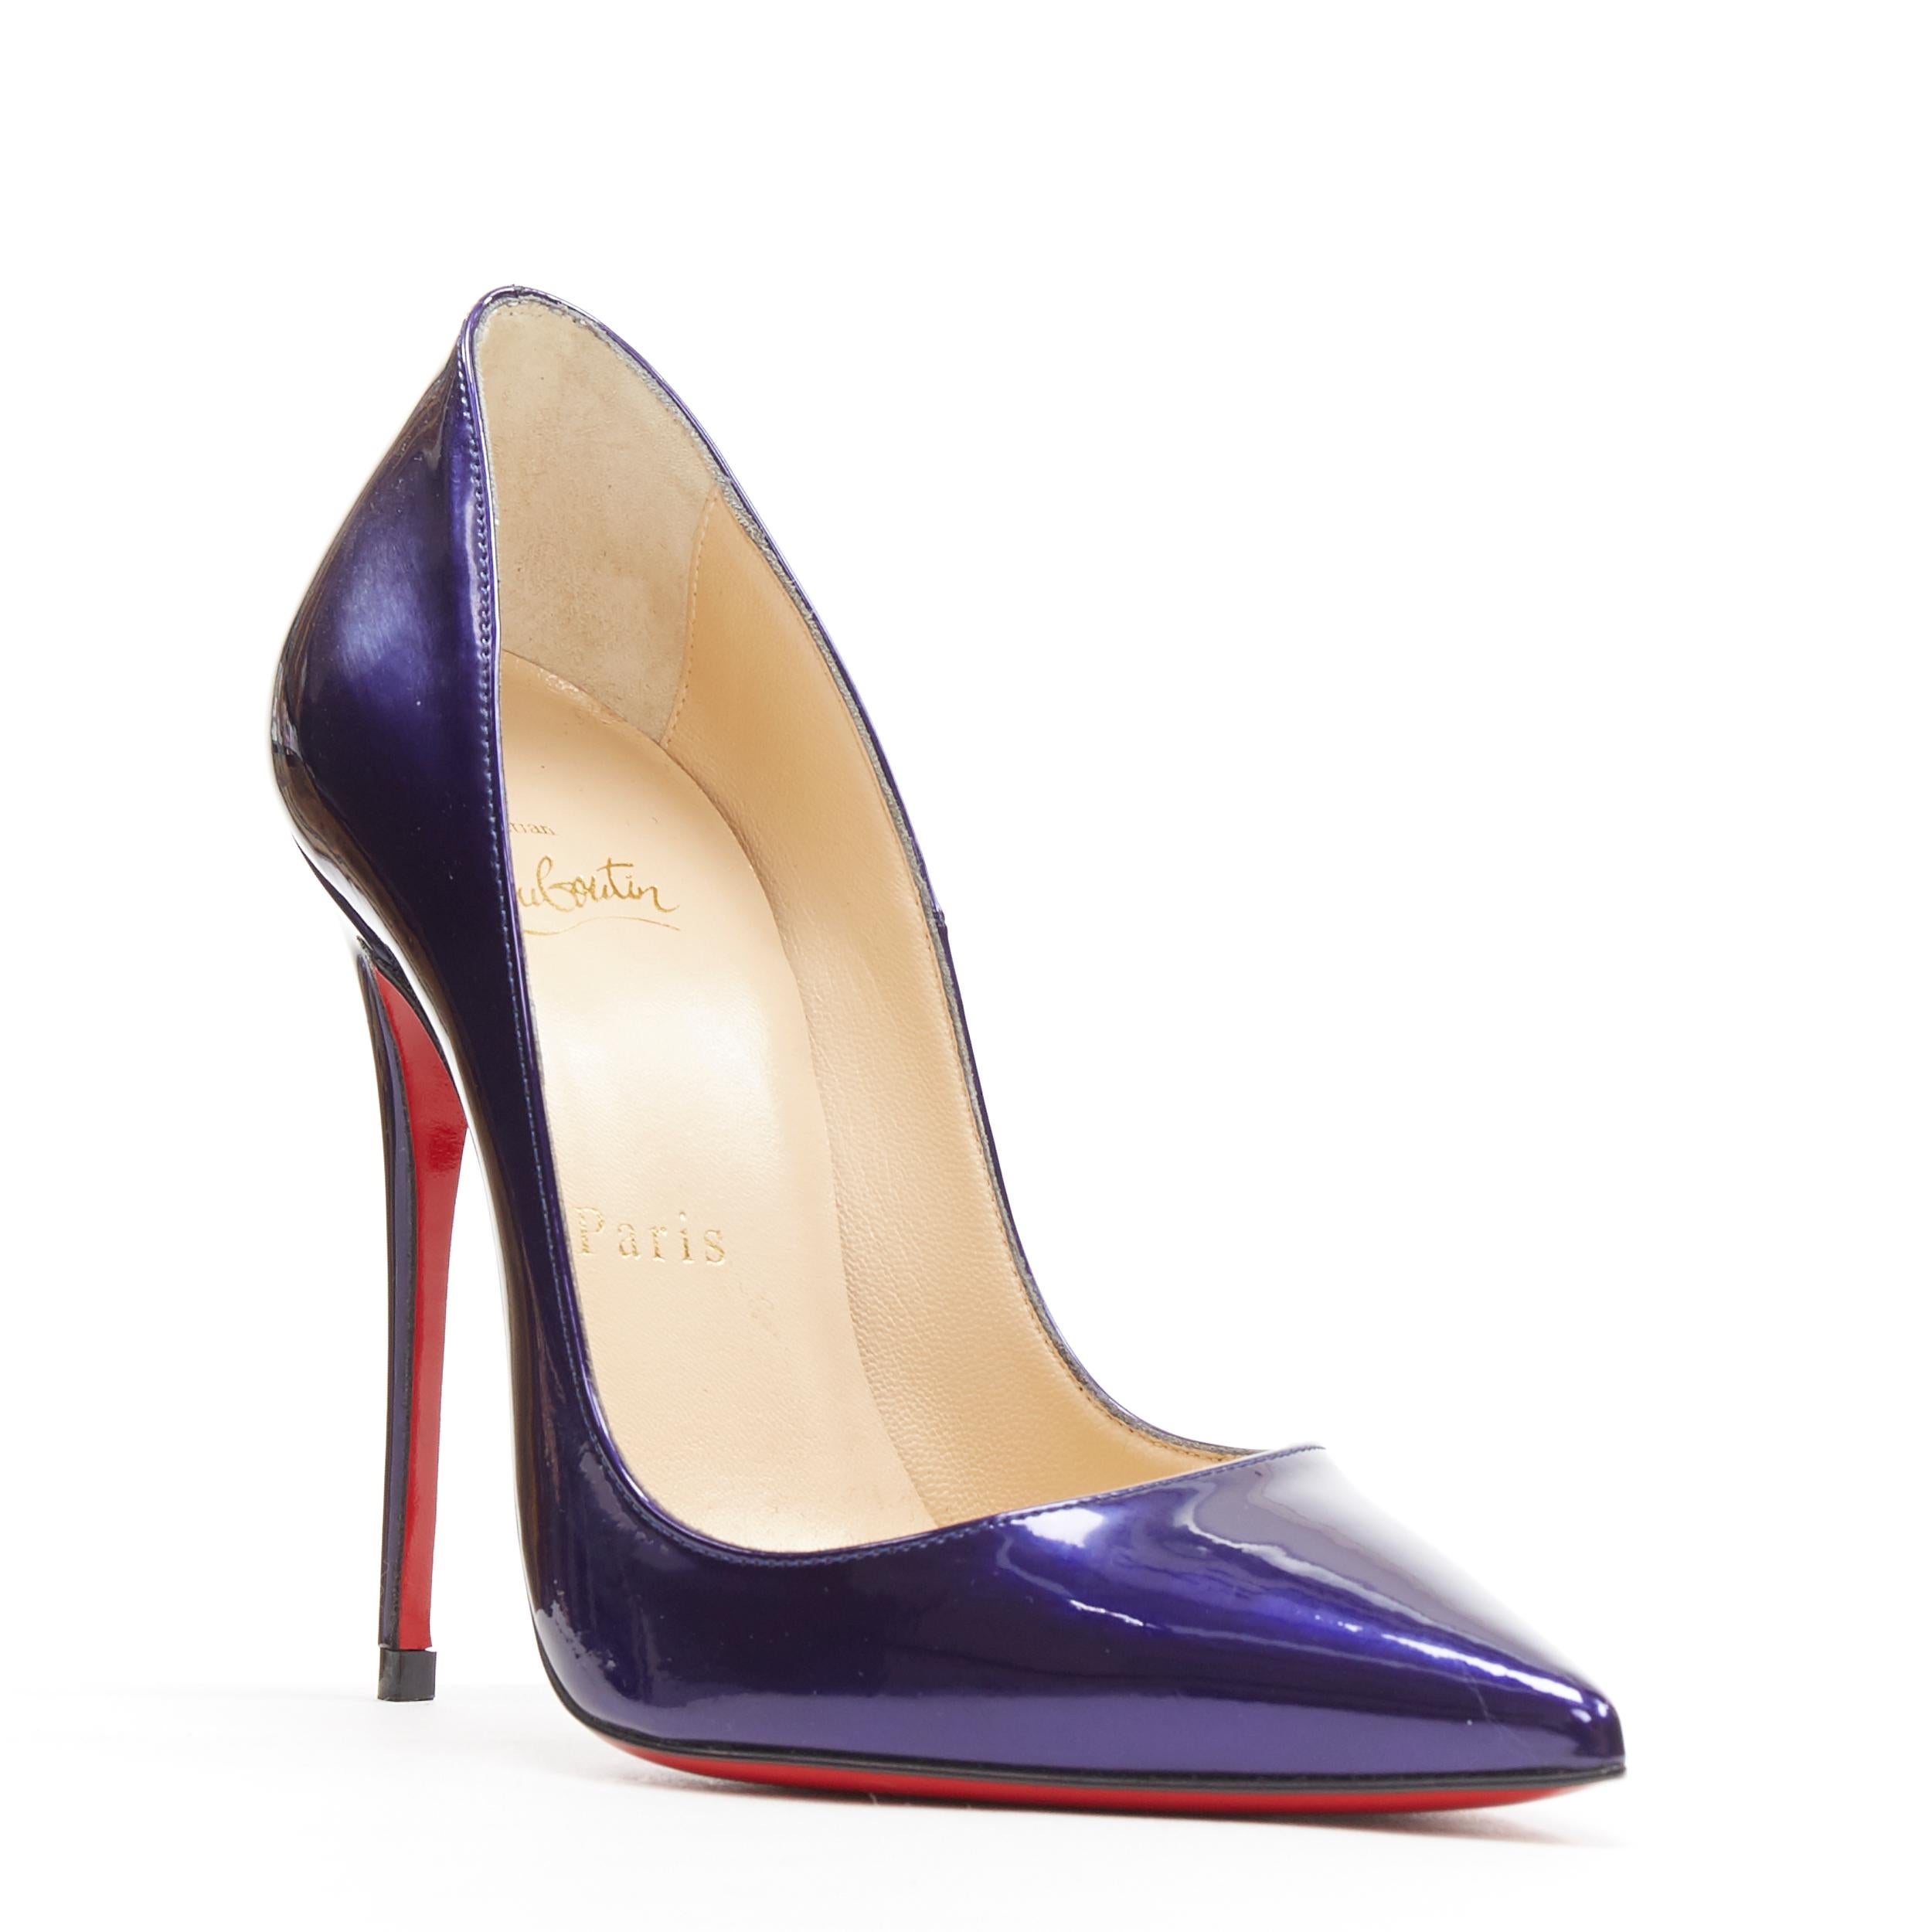 new CHRISTIAN LOUBOUTIN So Kate 110 purple patent point toe pigalle pump EU34.5
Brand: Christian Louboutin
Designer: Christian Louboutin
Model Name / Style: So Kate 110
Material: Patent leather
Color: Purple
Pattern: Solid
Closure: Slip on
Extra